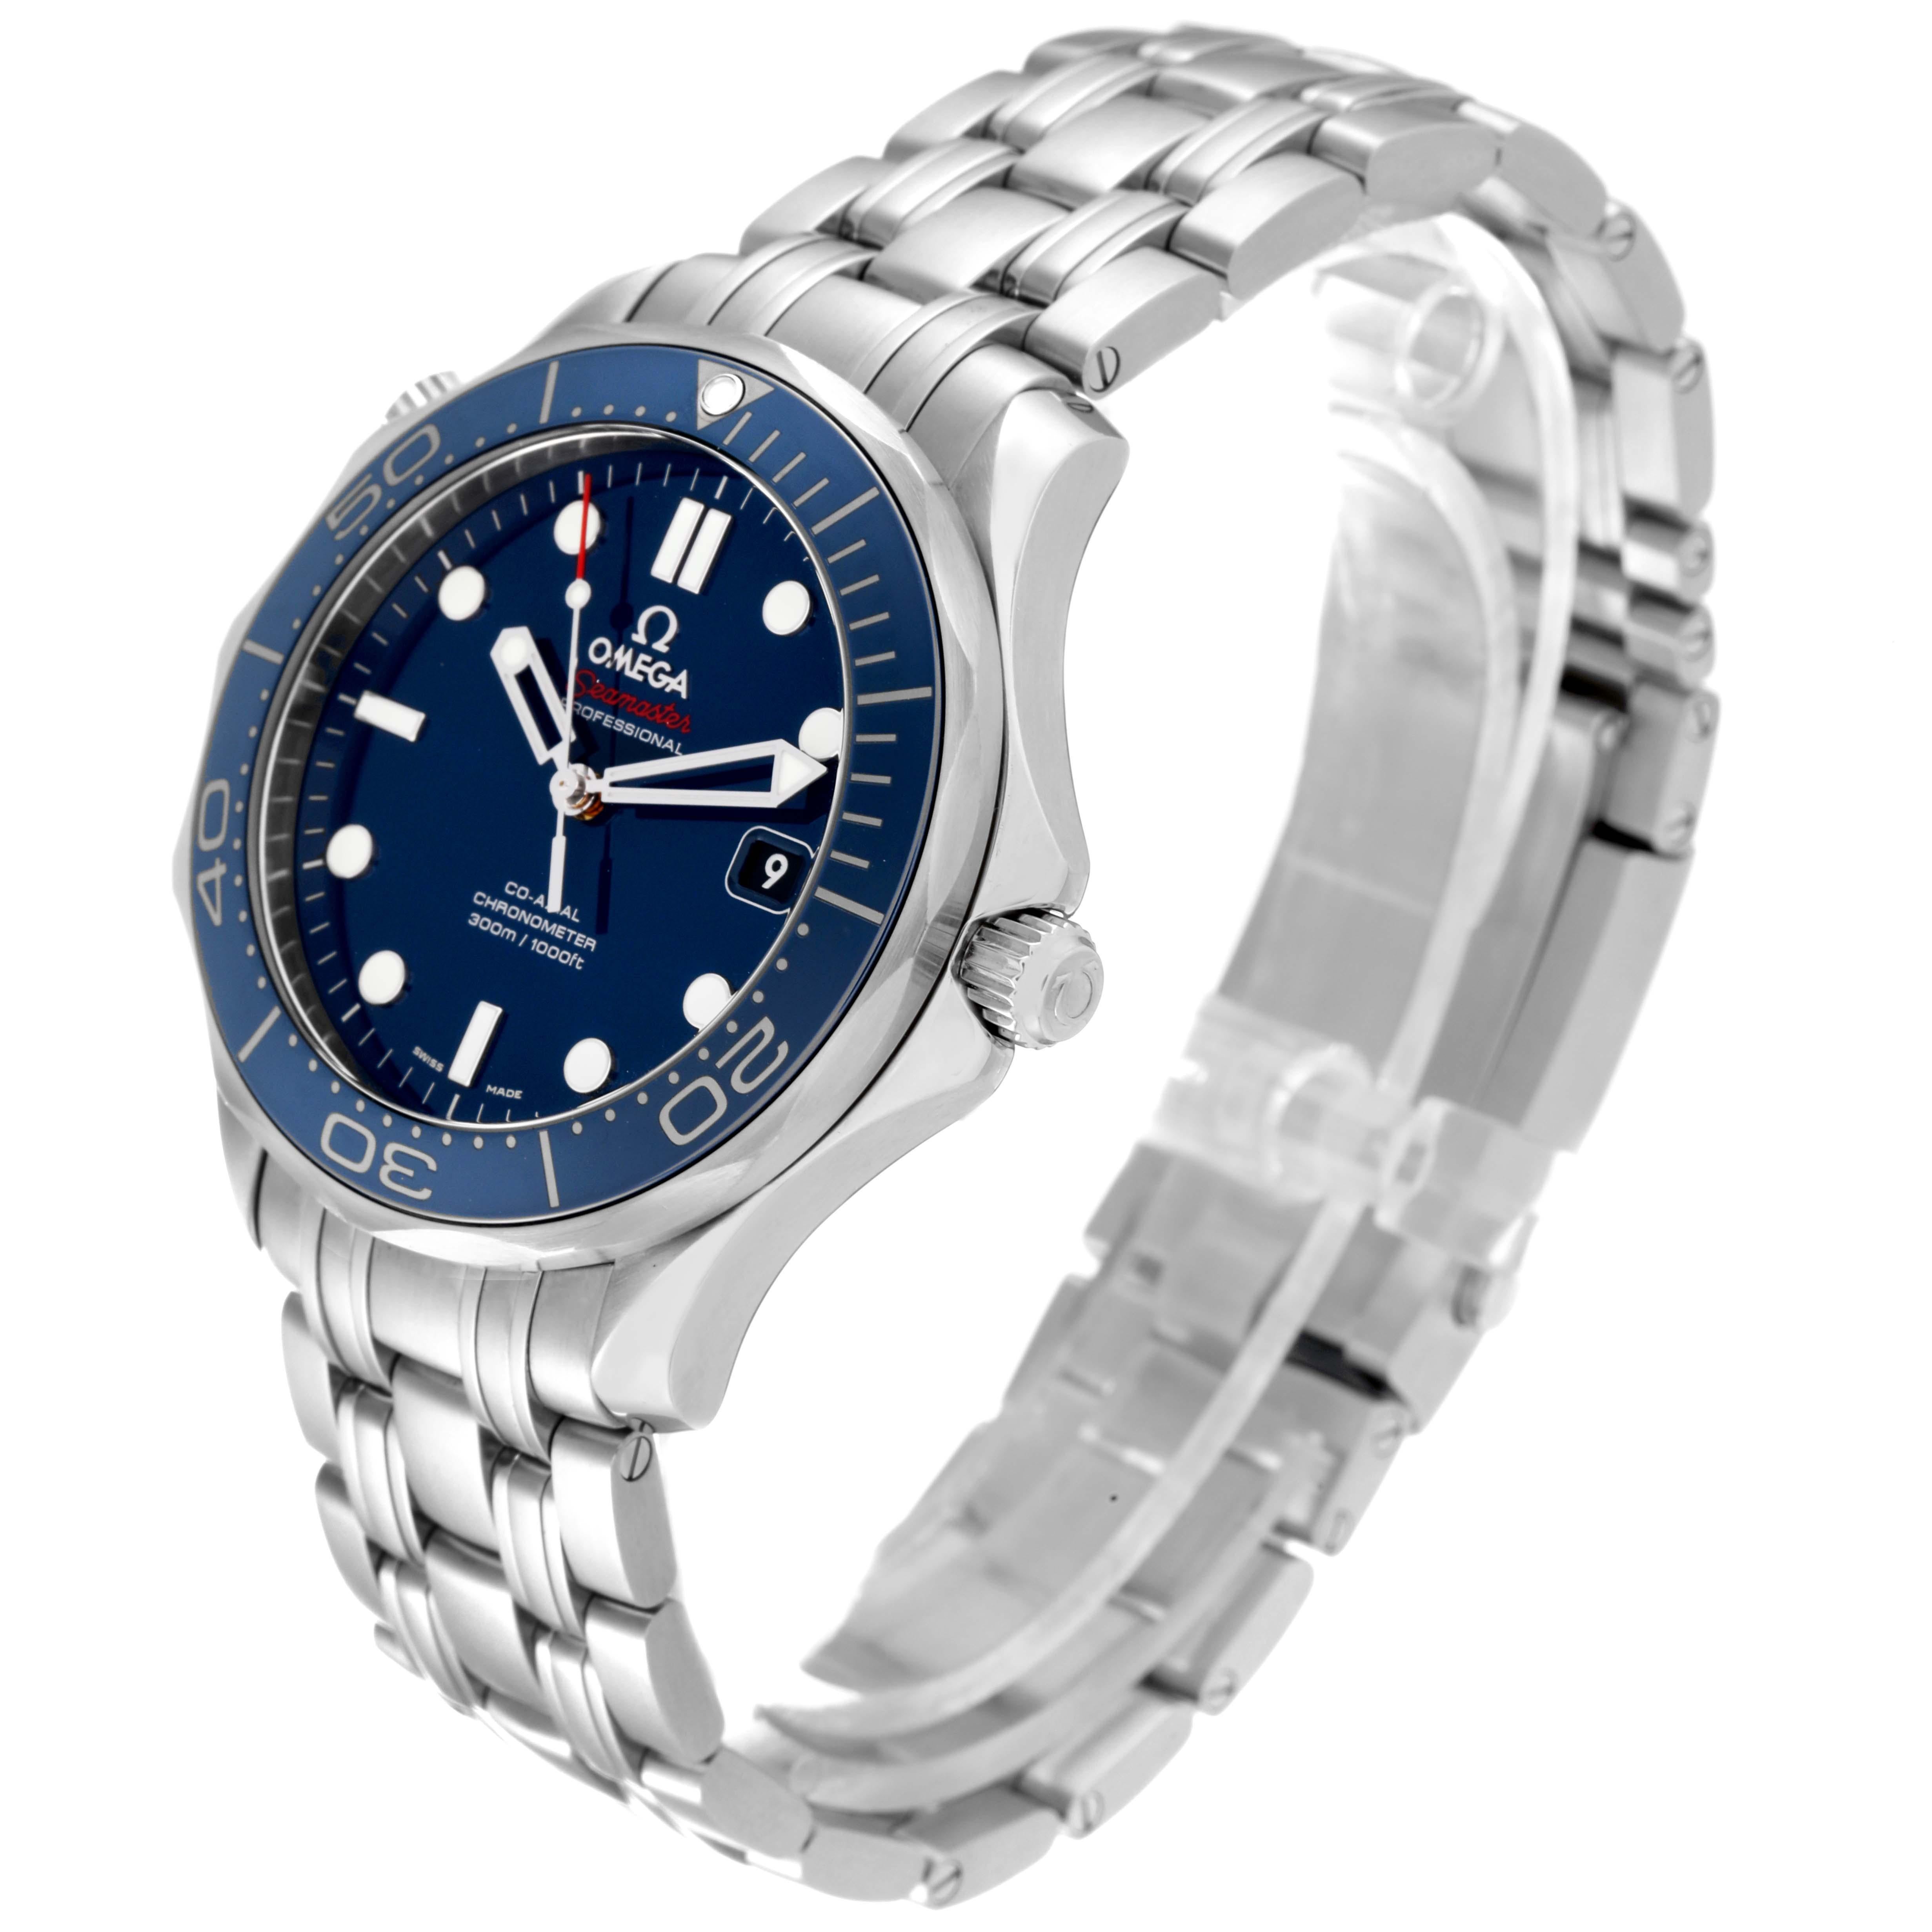 Men's Omega Seamaster Diver 300M Co-Axial Steel Mens Watch 212.30.41.20.03.001 Card For Sale